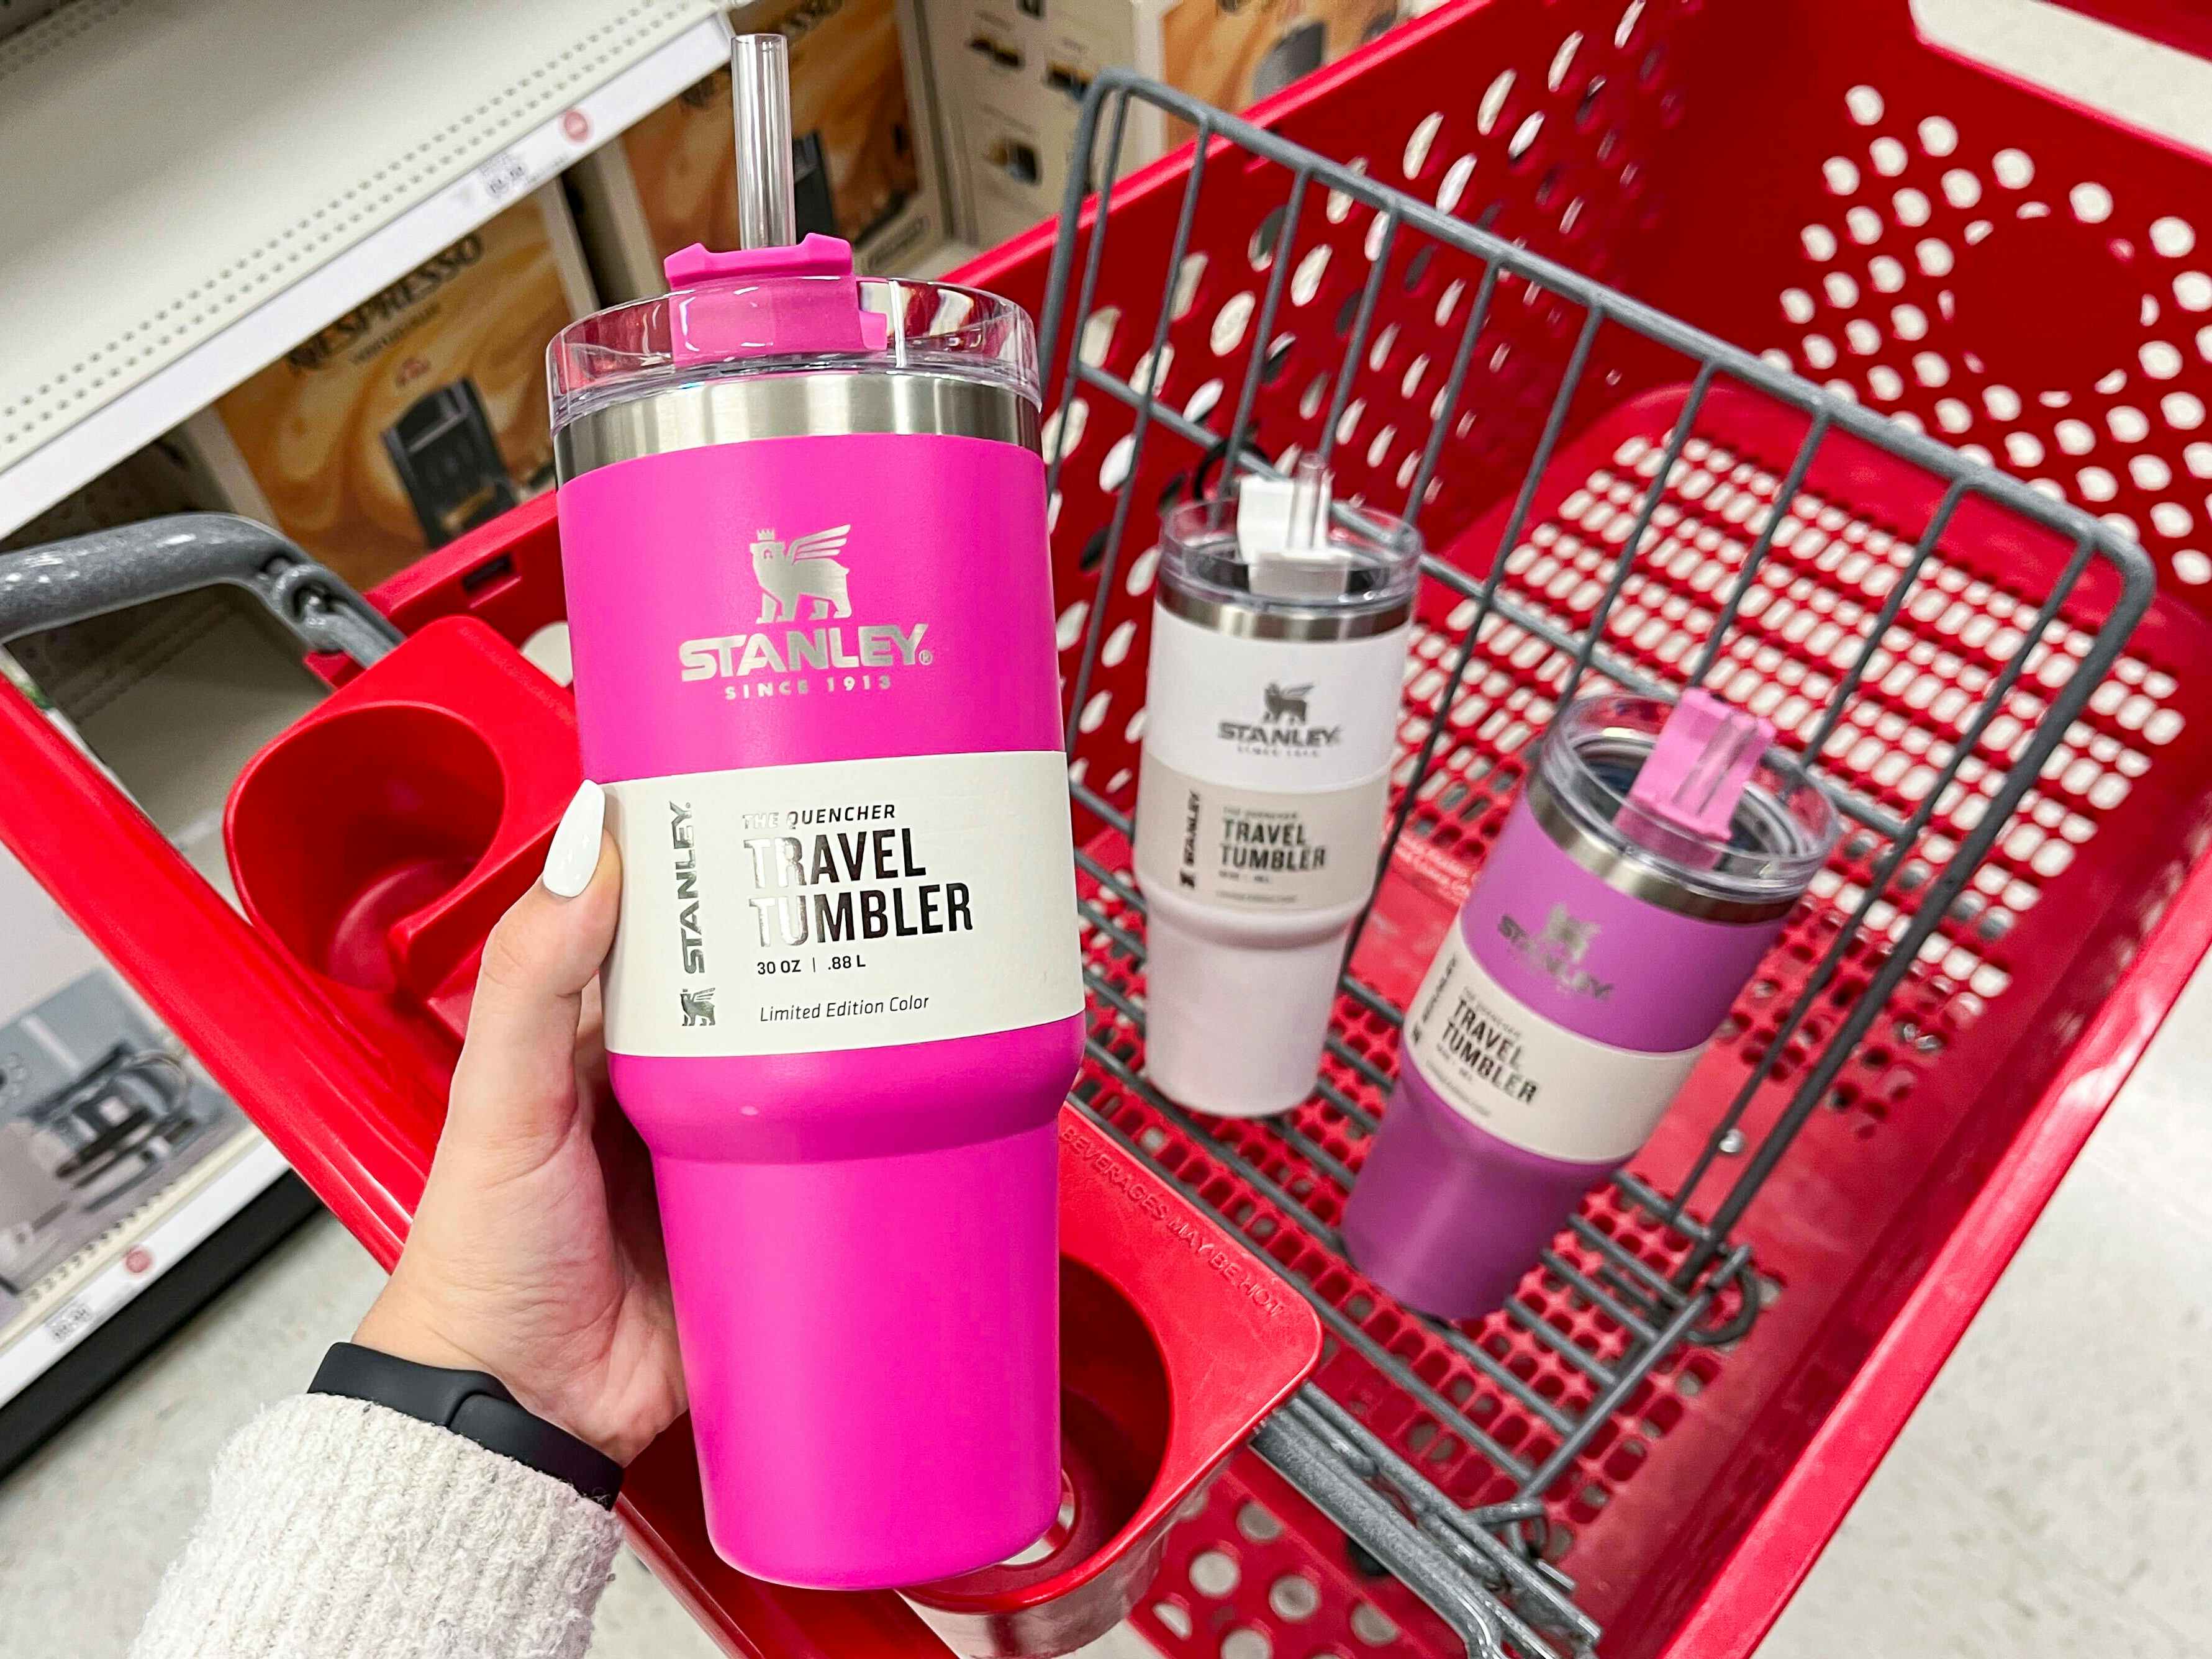 https://prod-cdn-thekrazycouponlady.imgix.net/wp-content/uploads/2022/07/target-exclusive-stanley-adventure-travel-quencher-tumblers-30-oz-cart-02-1672166969-1672166969.jpg?auto=format&fit=fill&q=25